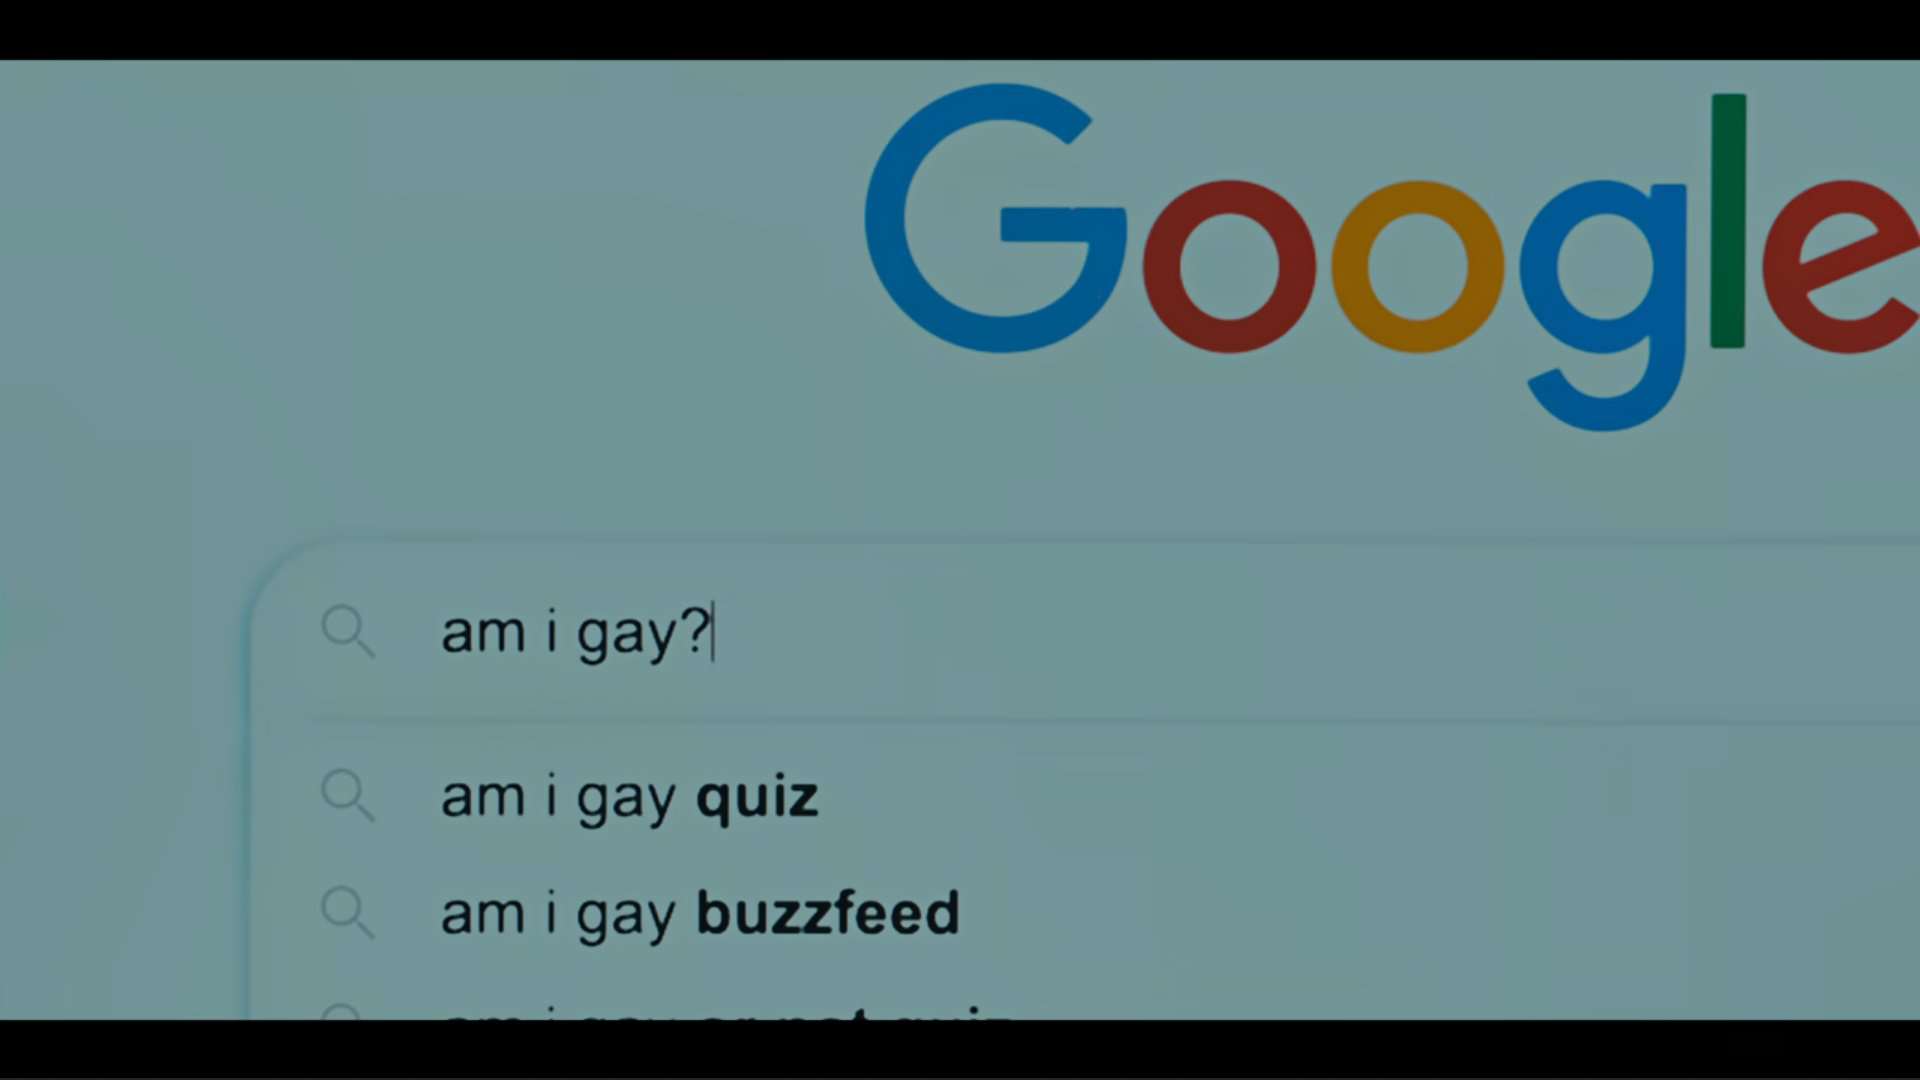 Nick's Google search asking if he is gay?